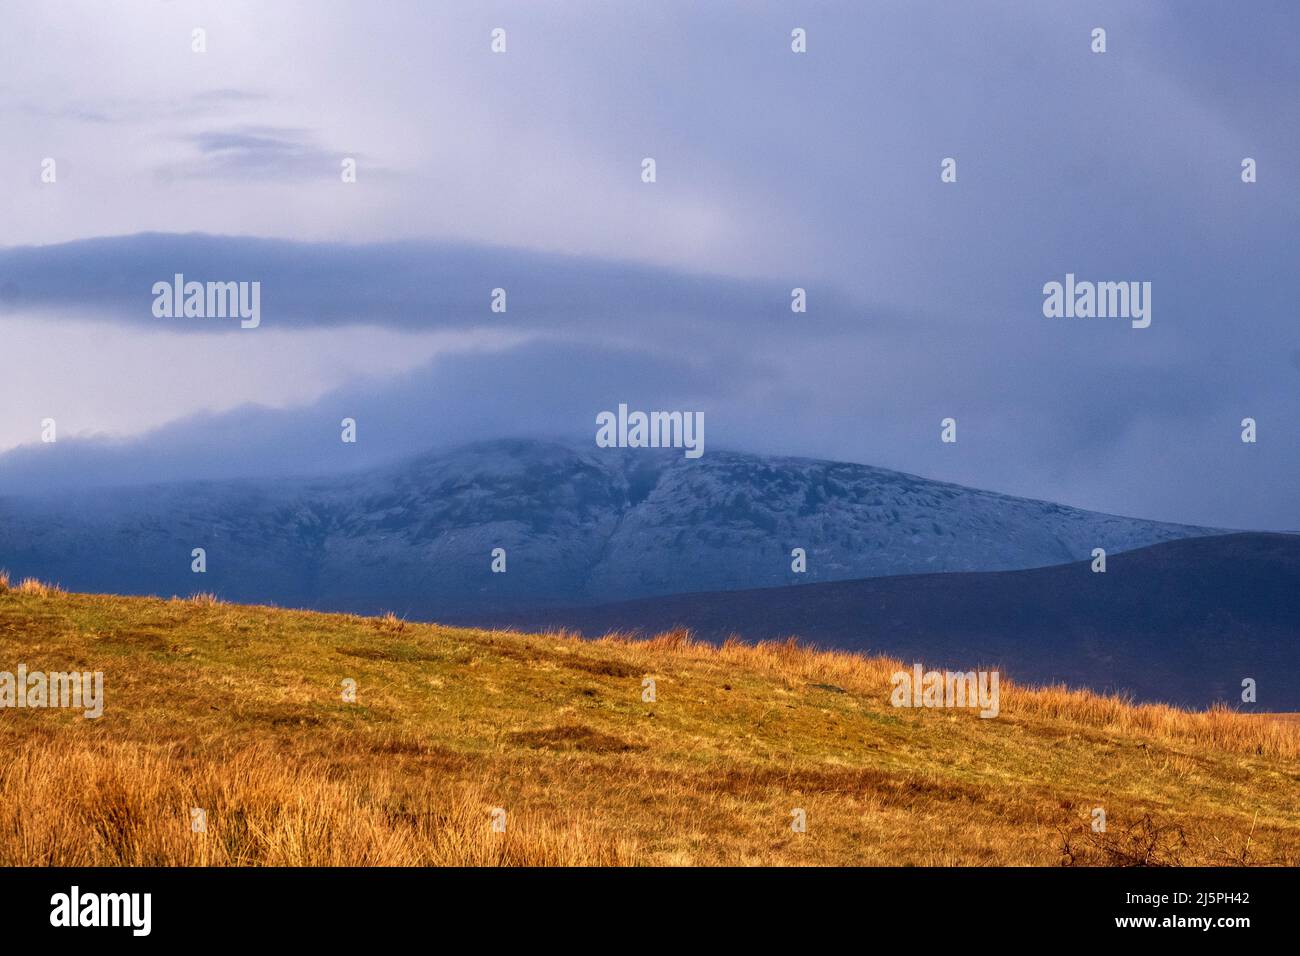 Snow-covered peak in Ballycroy National Park, seen from Achill Island, Ireland Stock Photo